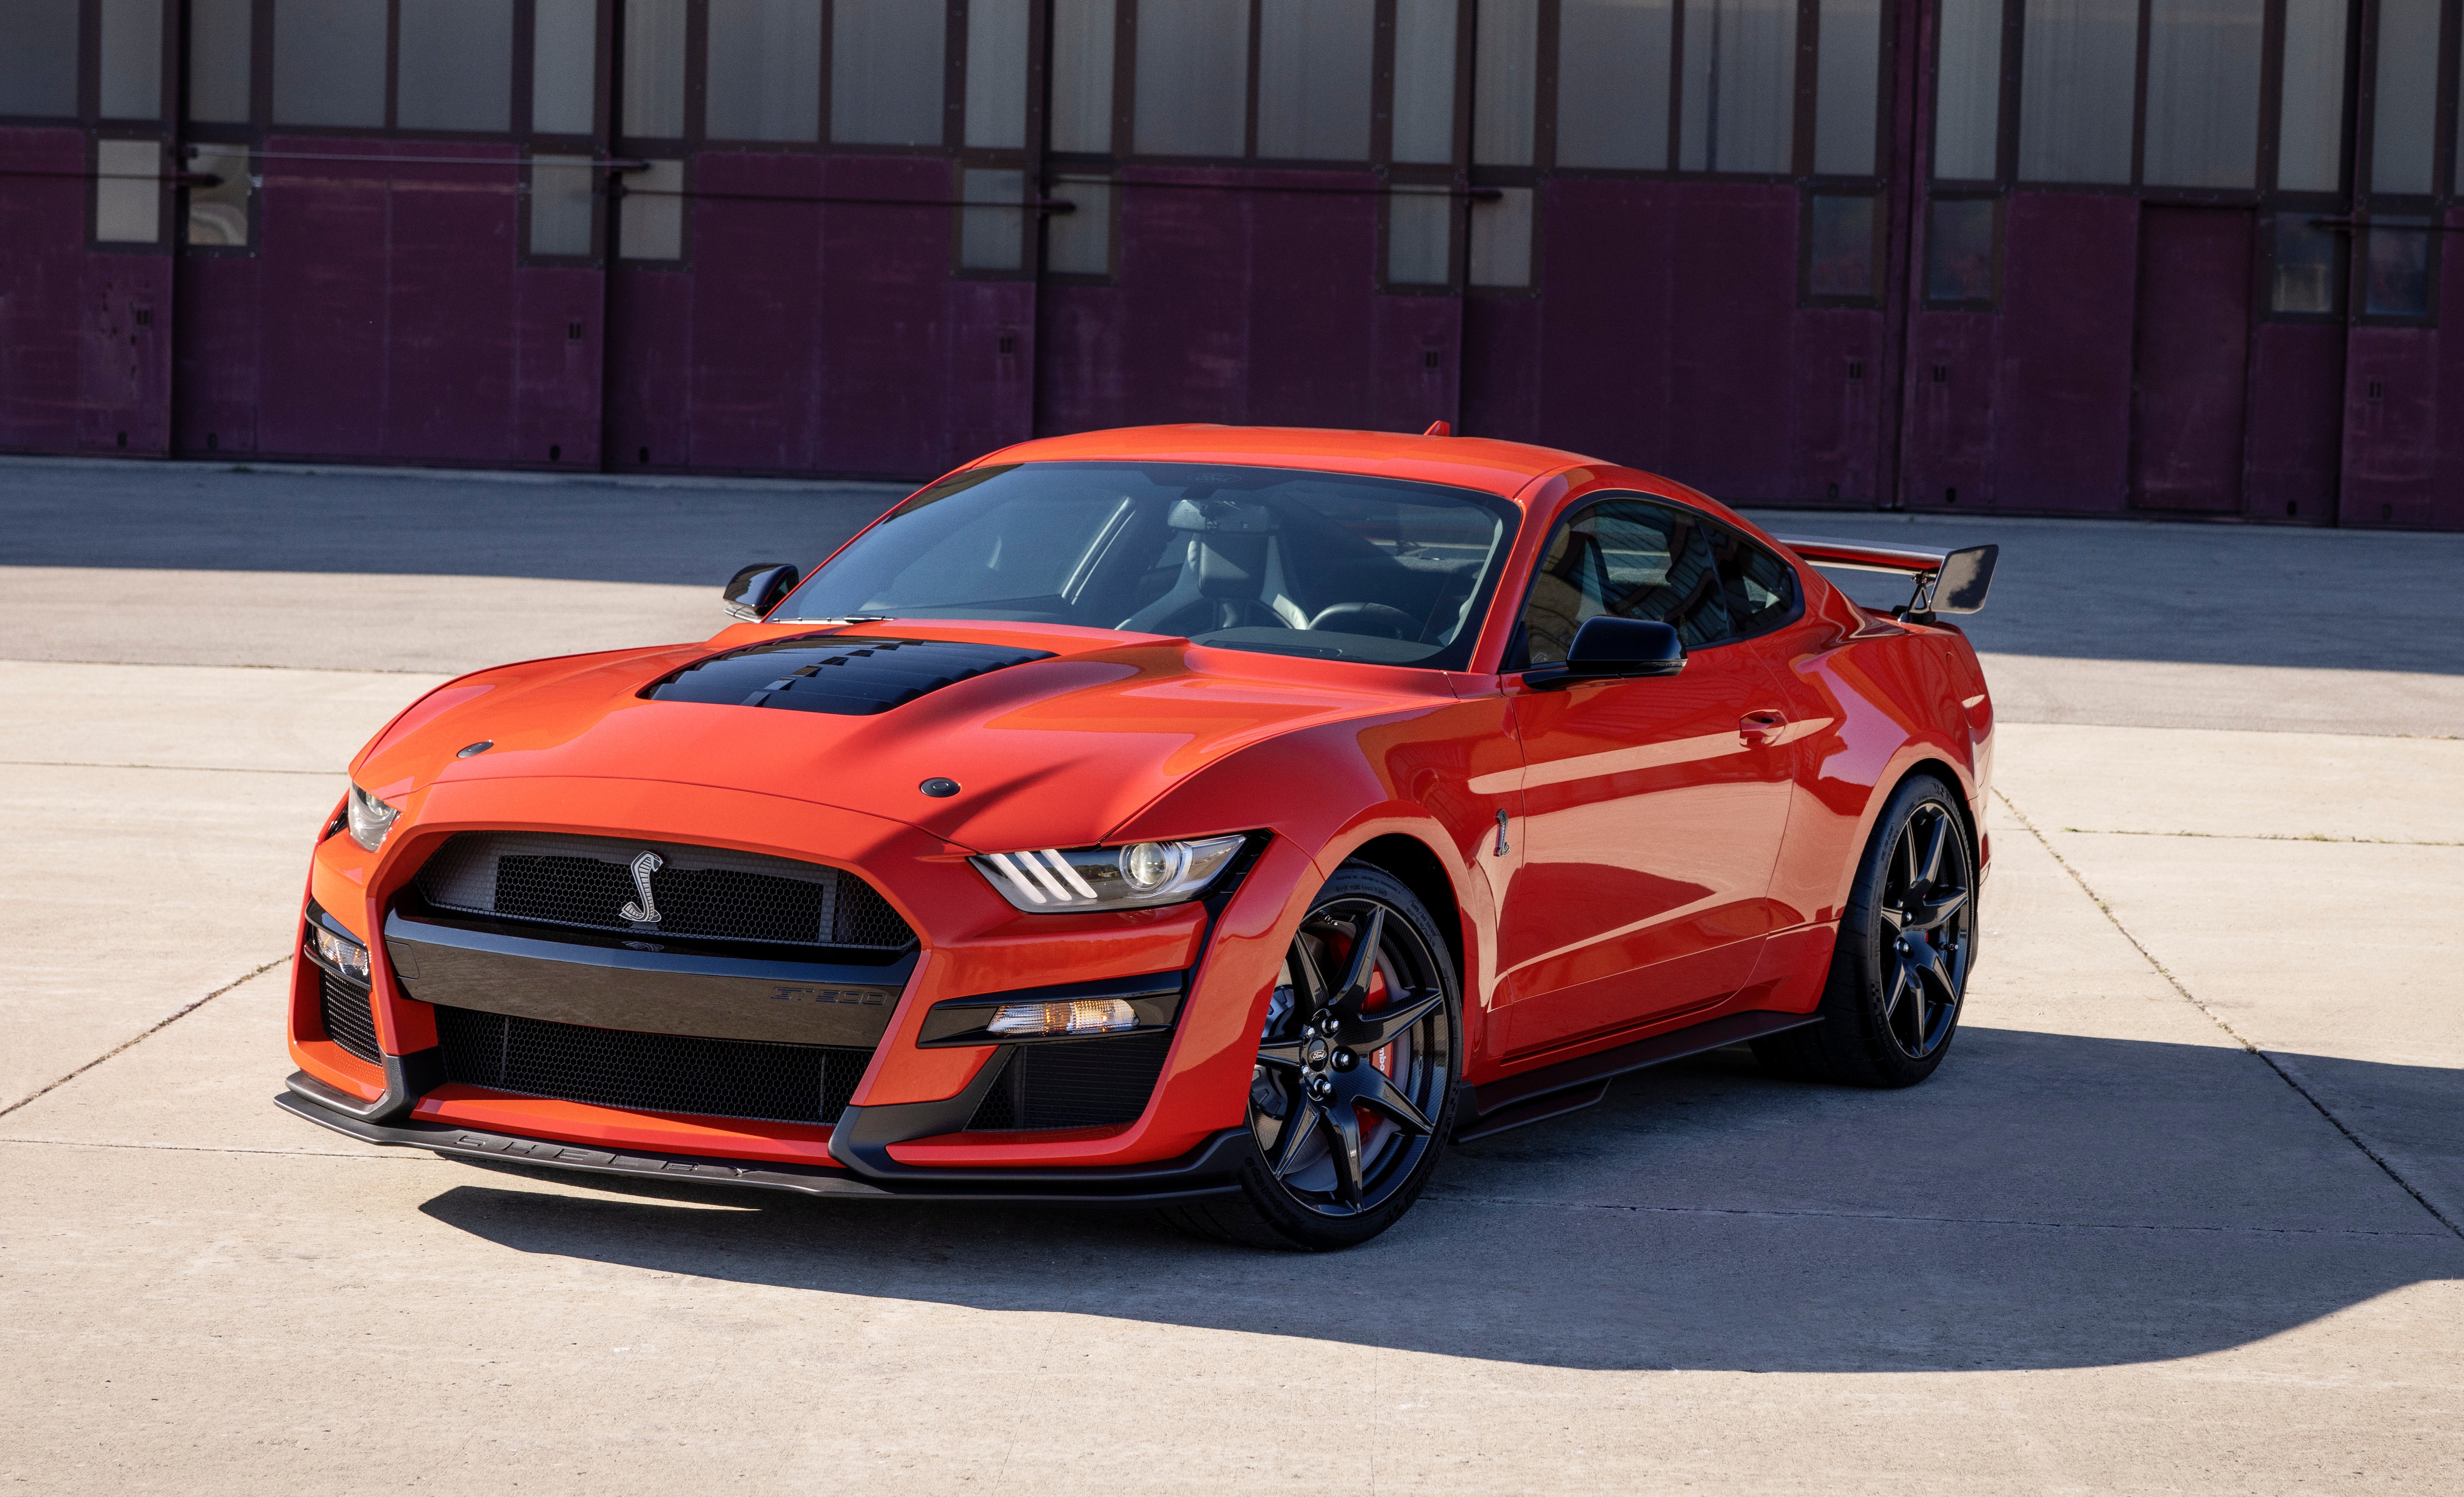 Mustang Family Grows with New Limited-Edition 2022 Mustang Shelby GT500  Heritage Edition, First-ever Mustang Coastal Edition, Plus Ford Performance-Exclusive  Code Orange Paint